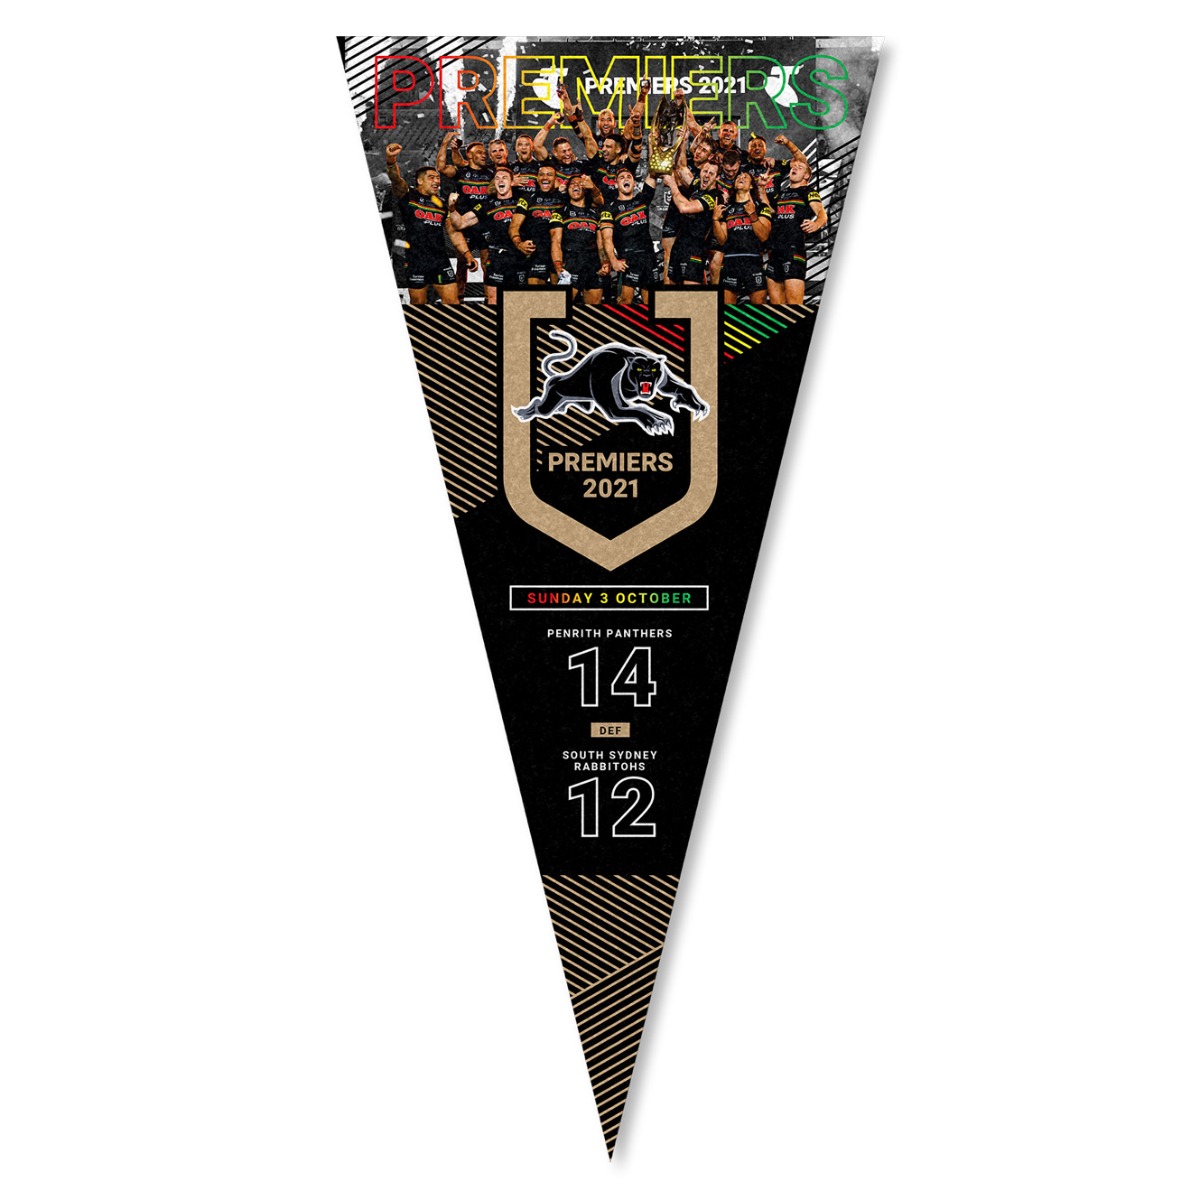 PRE ORDER - Penrith Panthers 2021 NRL Premiers Team Image Felt Wall Pennant Banner Flag